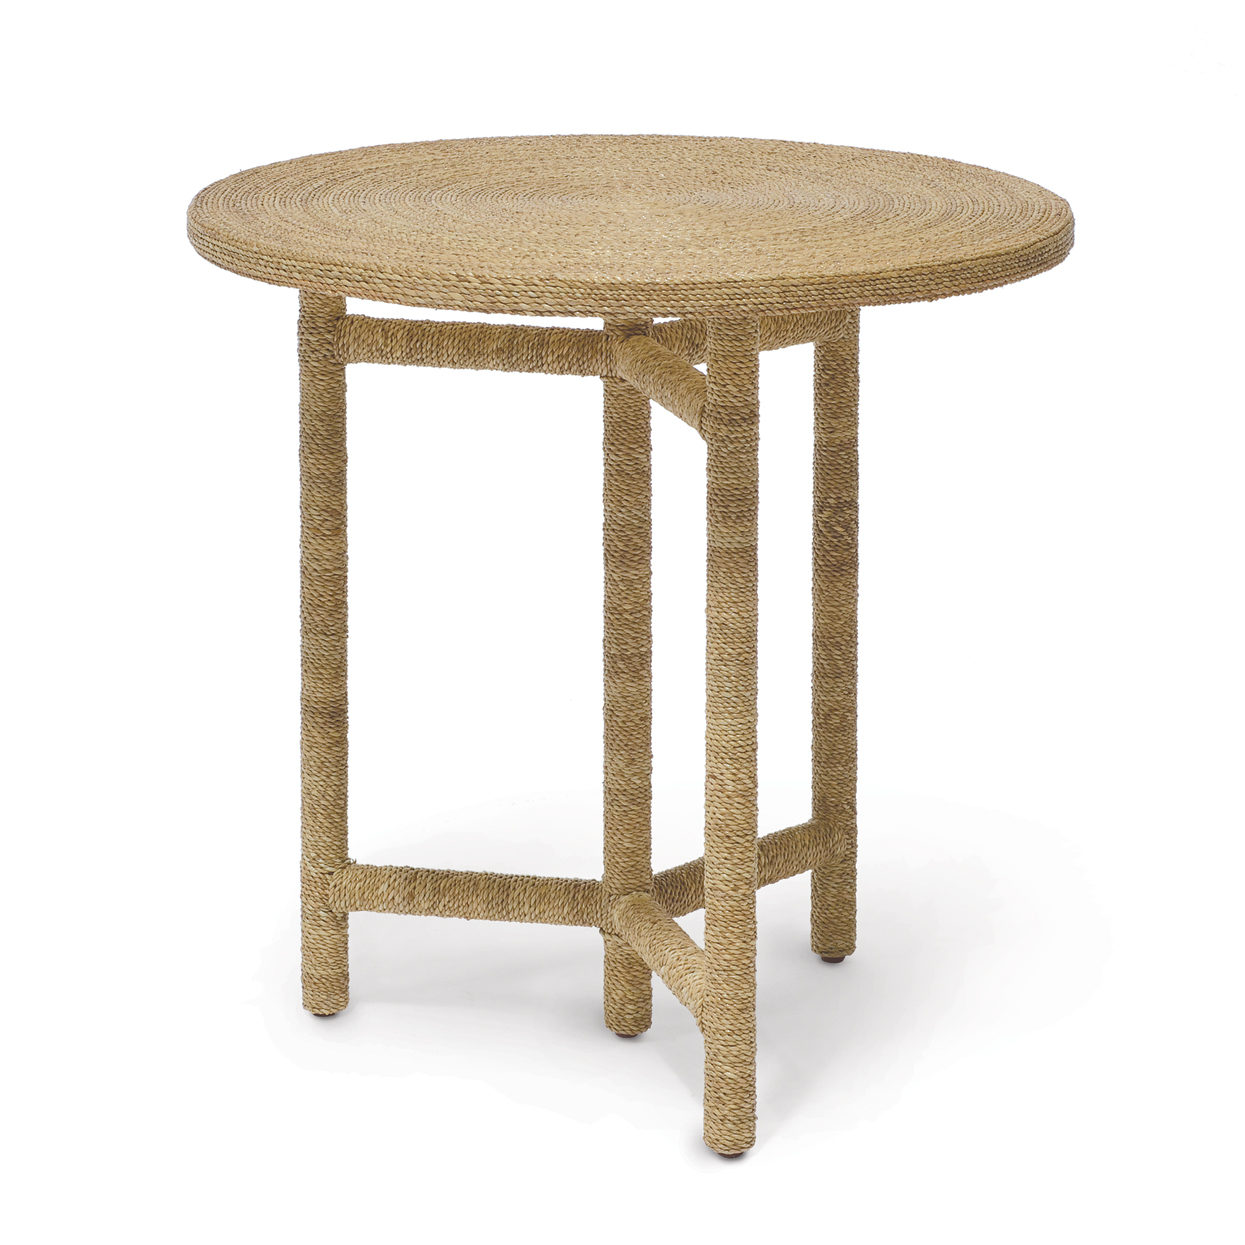 Seagrass Natural Wicker Side Table 